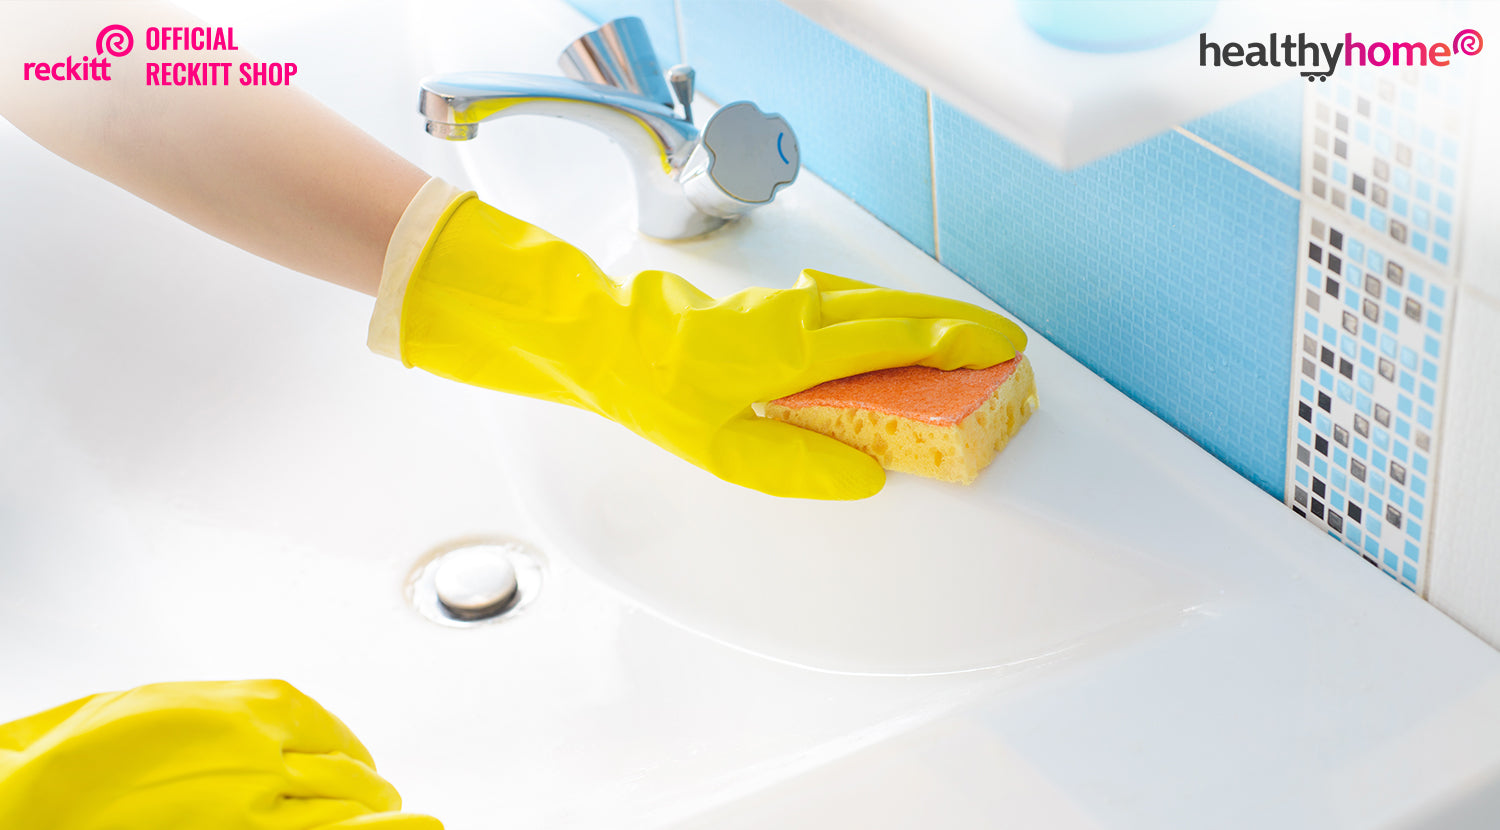 Tips To Keep Your Bathroom Clean & Hygienic